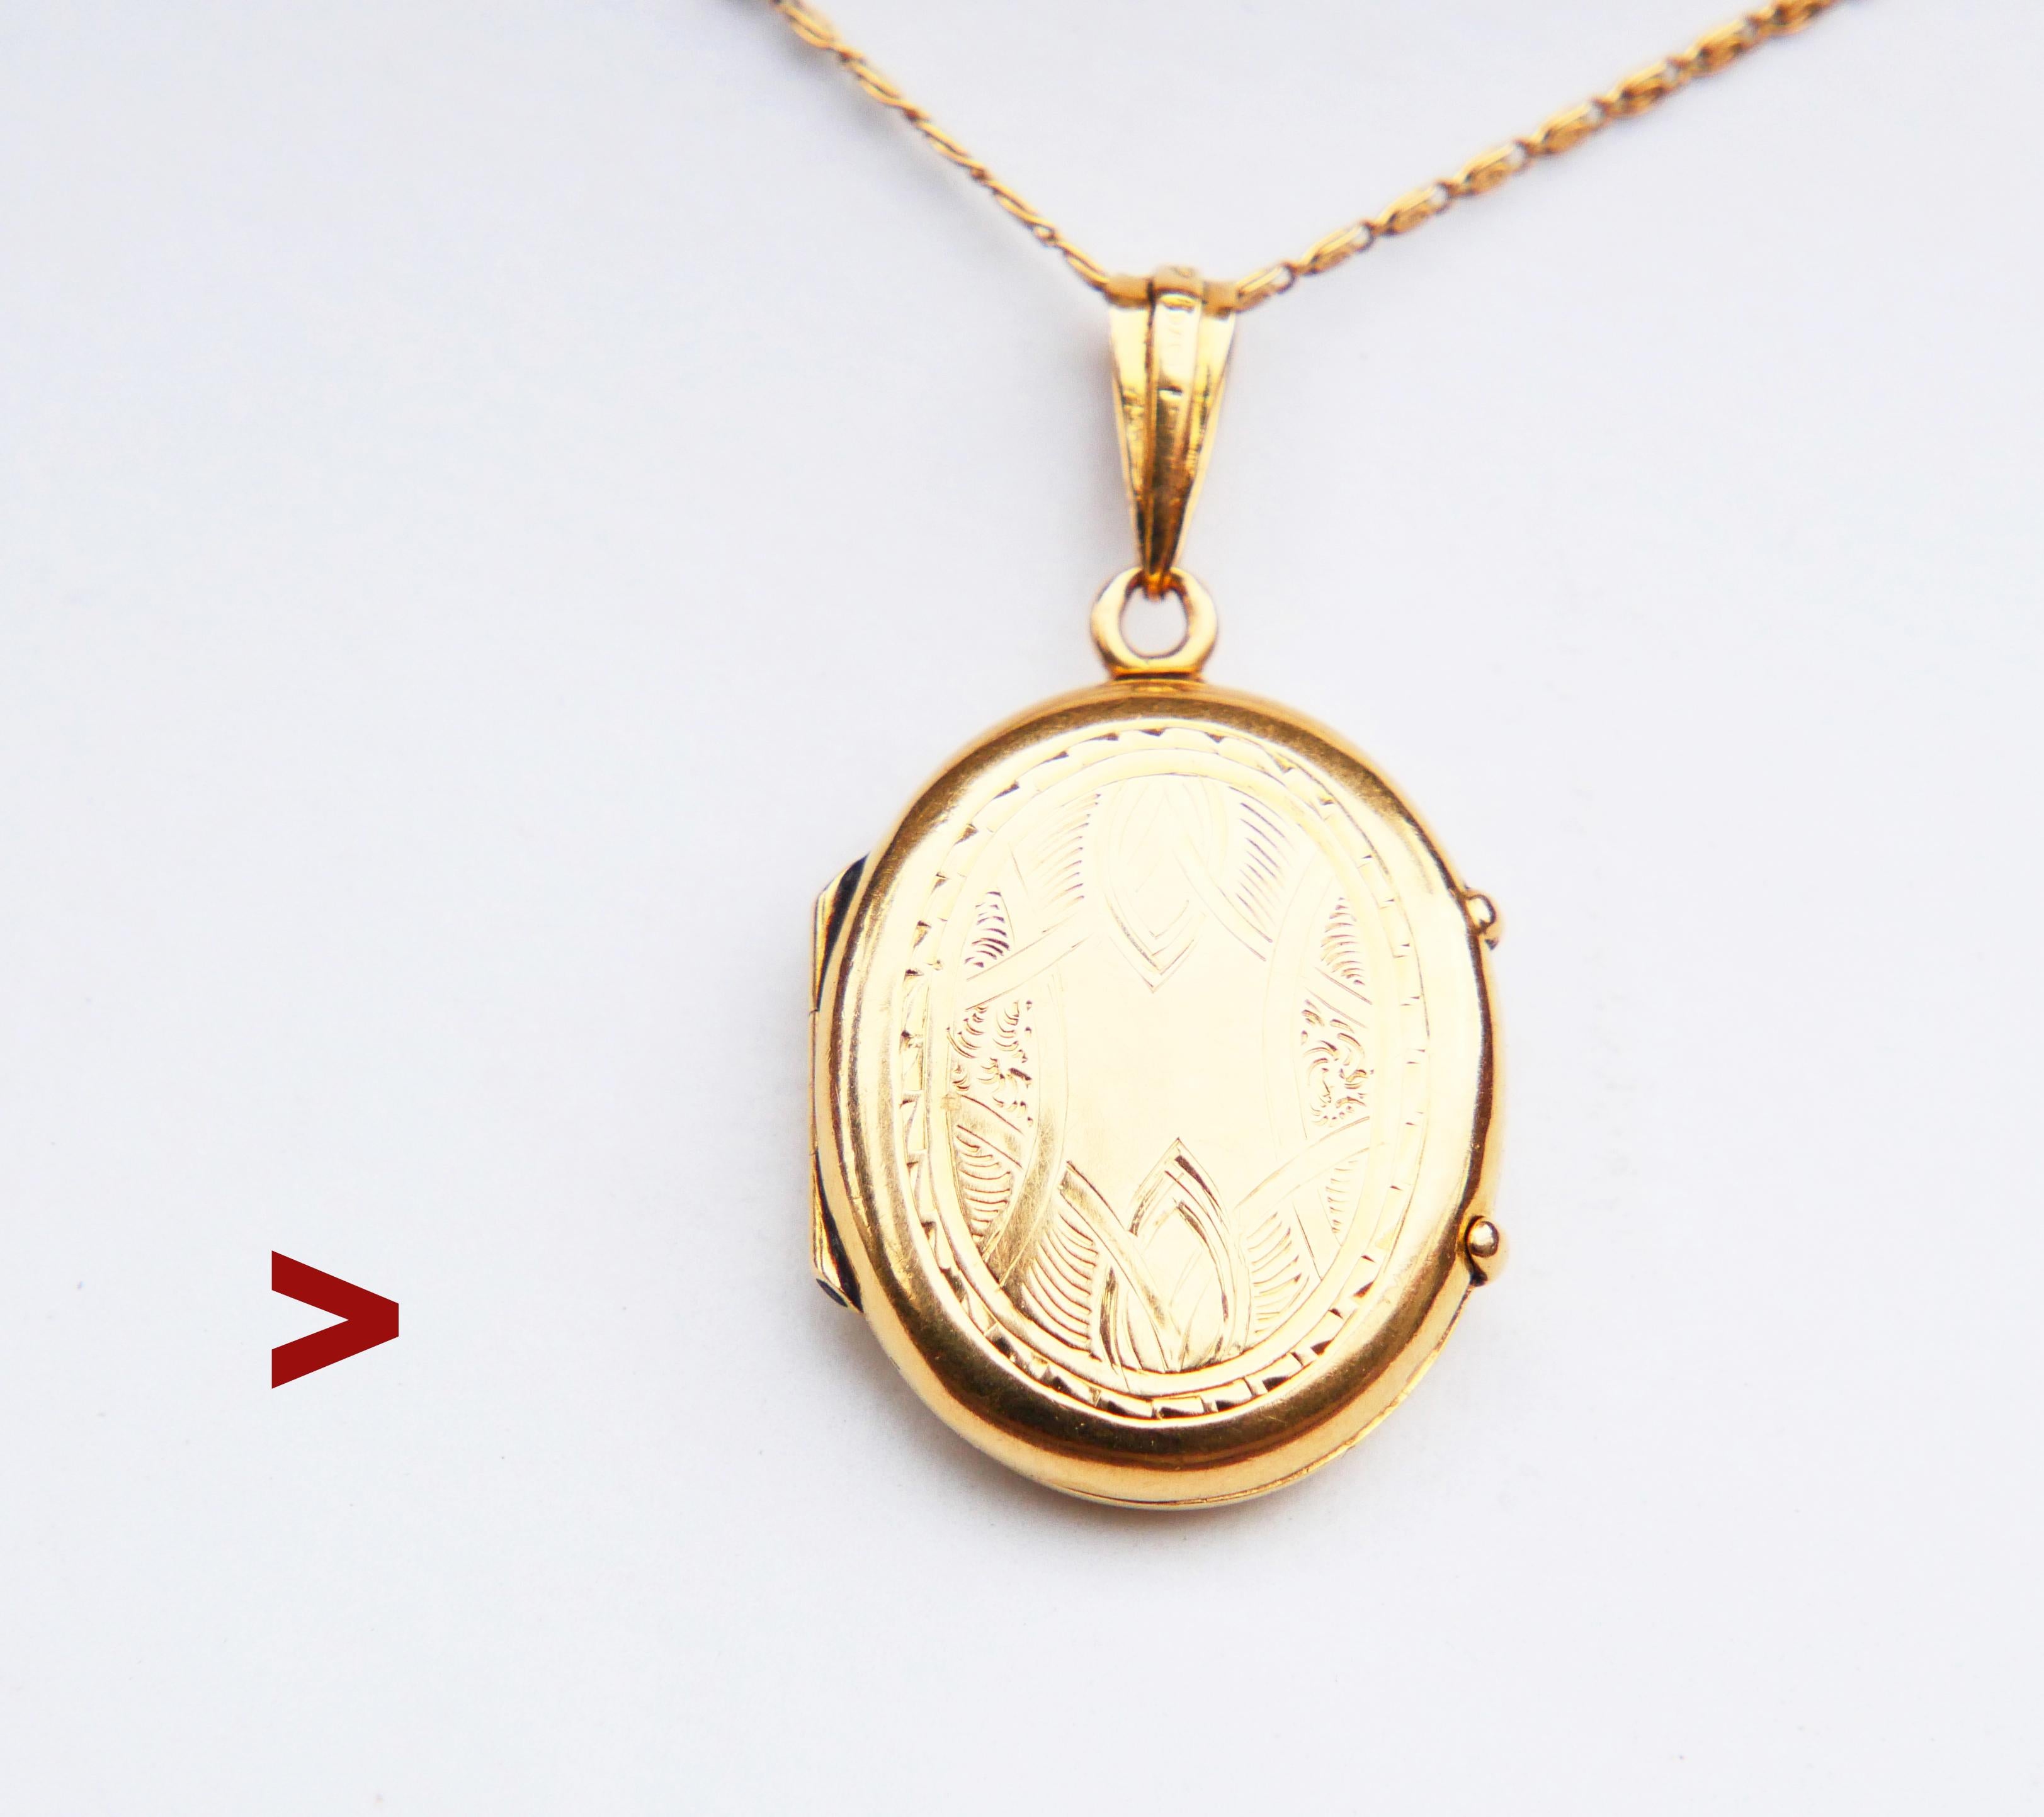 Old Swedish Pendant / Locket in solid 18K Yellow Gold.

Fine hand-engraved ornaments on both sides. One internal removable bezel inside, no glass.

All parts tested 18K Yellow Gold. Bail with worn Swedish hallmarks, date code likely O6 / 1892.

35